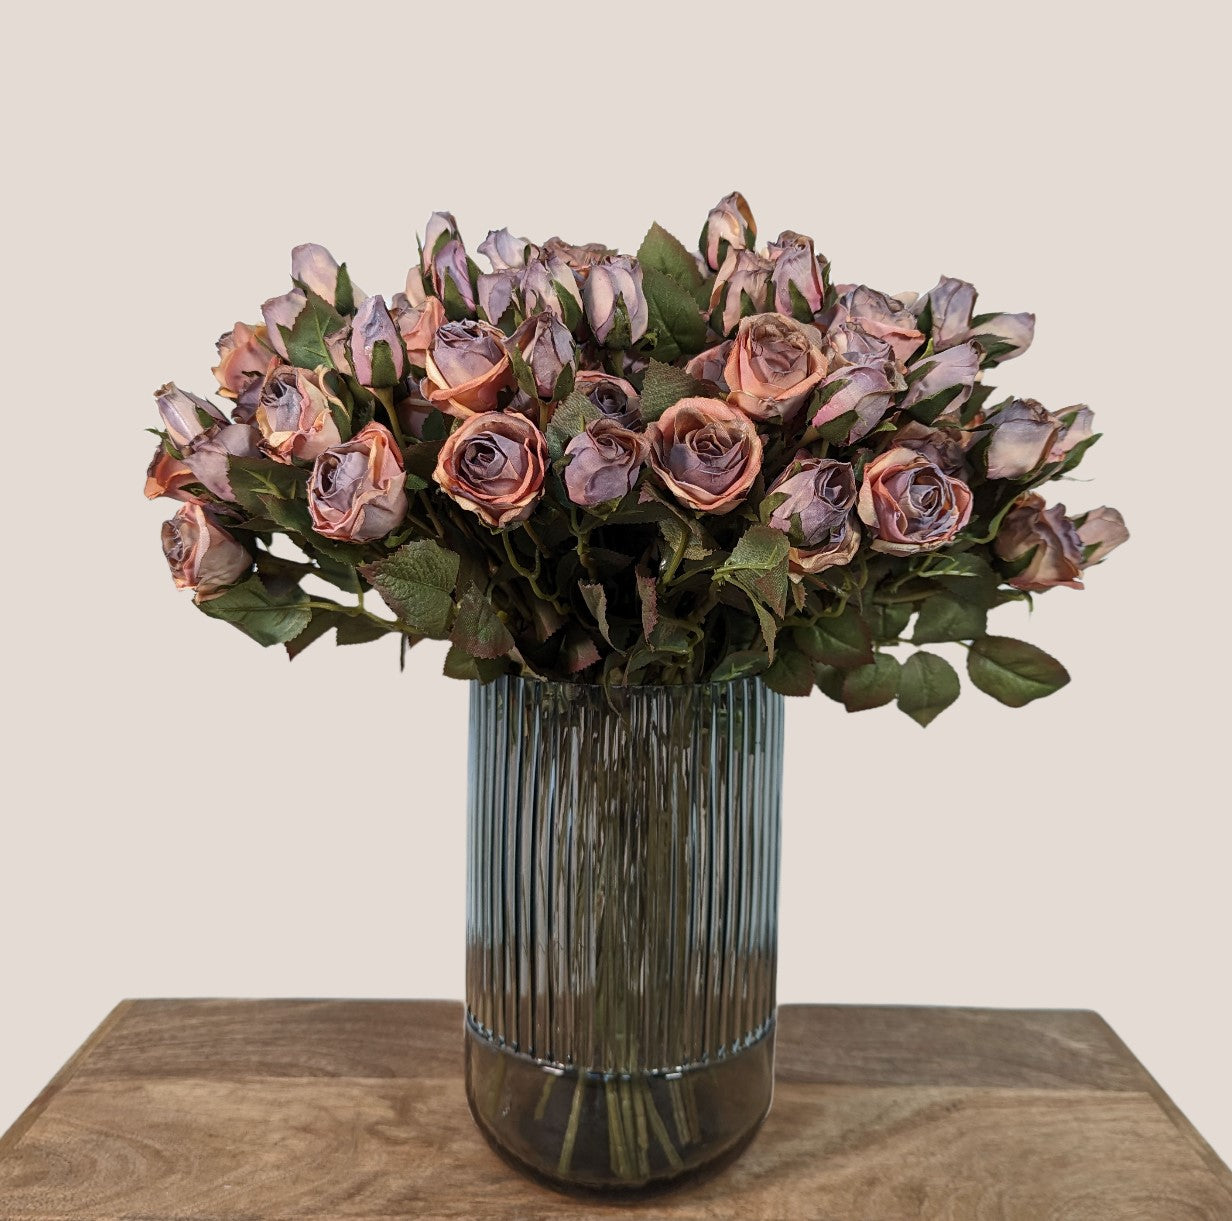 Artificial rose bouquet crafted to look preserved, featuring 5 stems each containing 5 flower heads in mauve pink, purples, and light browns creating a dried look. The bouquet has a total of 25 flower heads and is arranged in a smoky gray fluted glass vase. Each stem is 17 inches with a green to brown gradient, serrated leaves with dark red tips, and small artificial buds adding a lifelike look. The image showcases the bouquet against a neutral beige background.